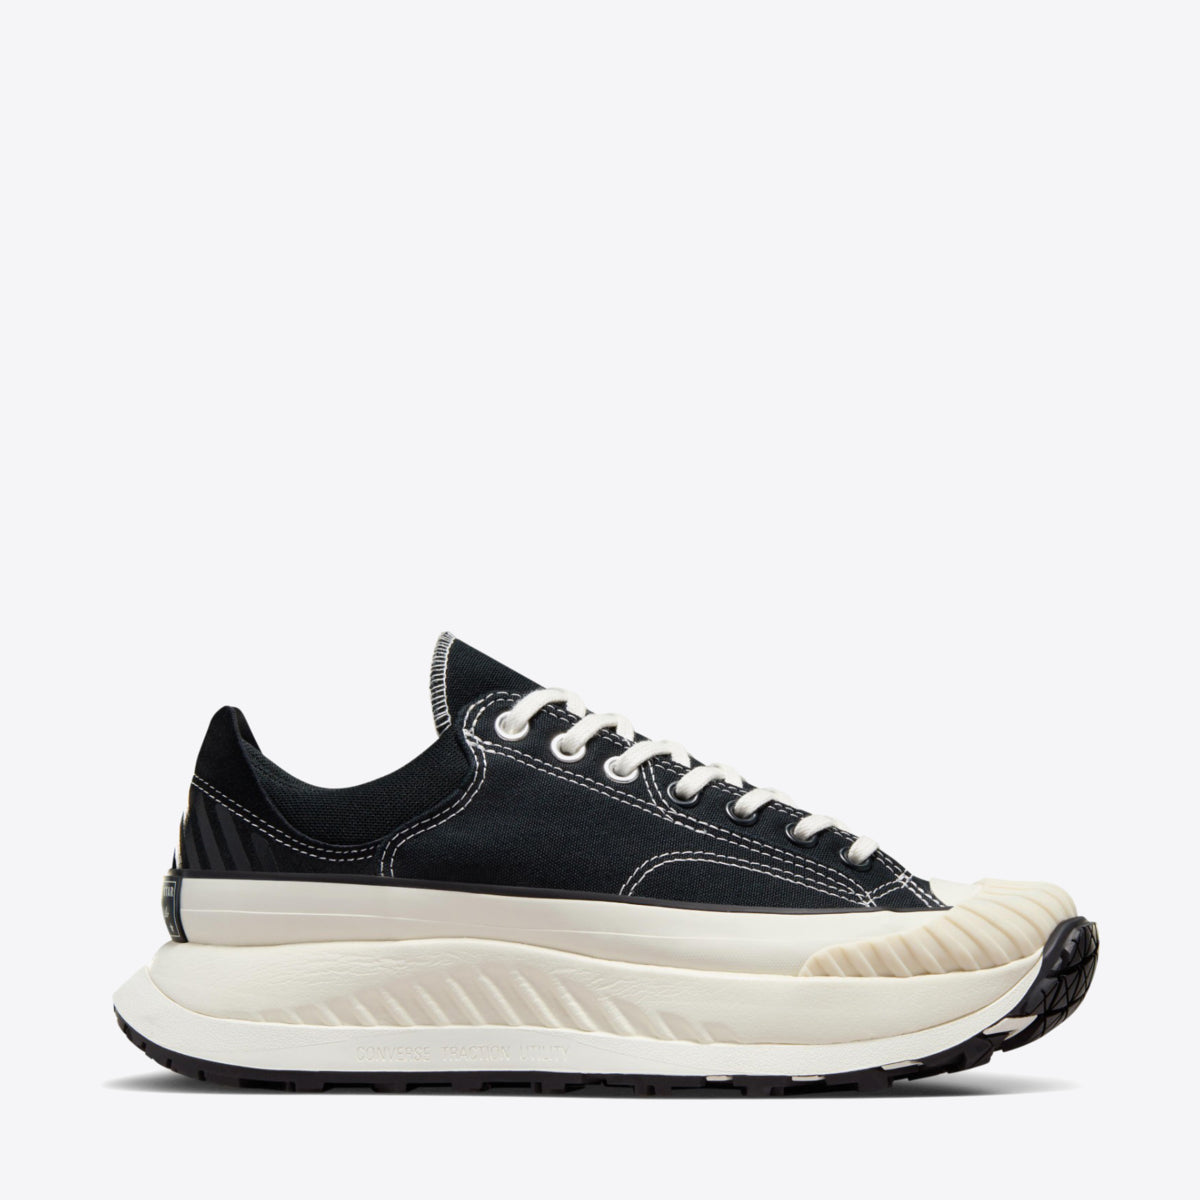 CONVERSE CT 70 AT Future Utility Low Black - Image 1